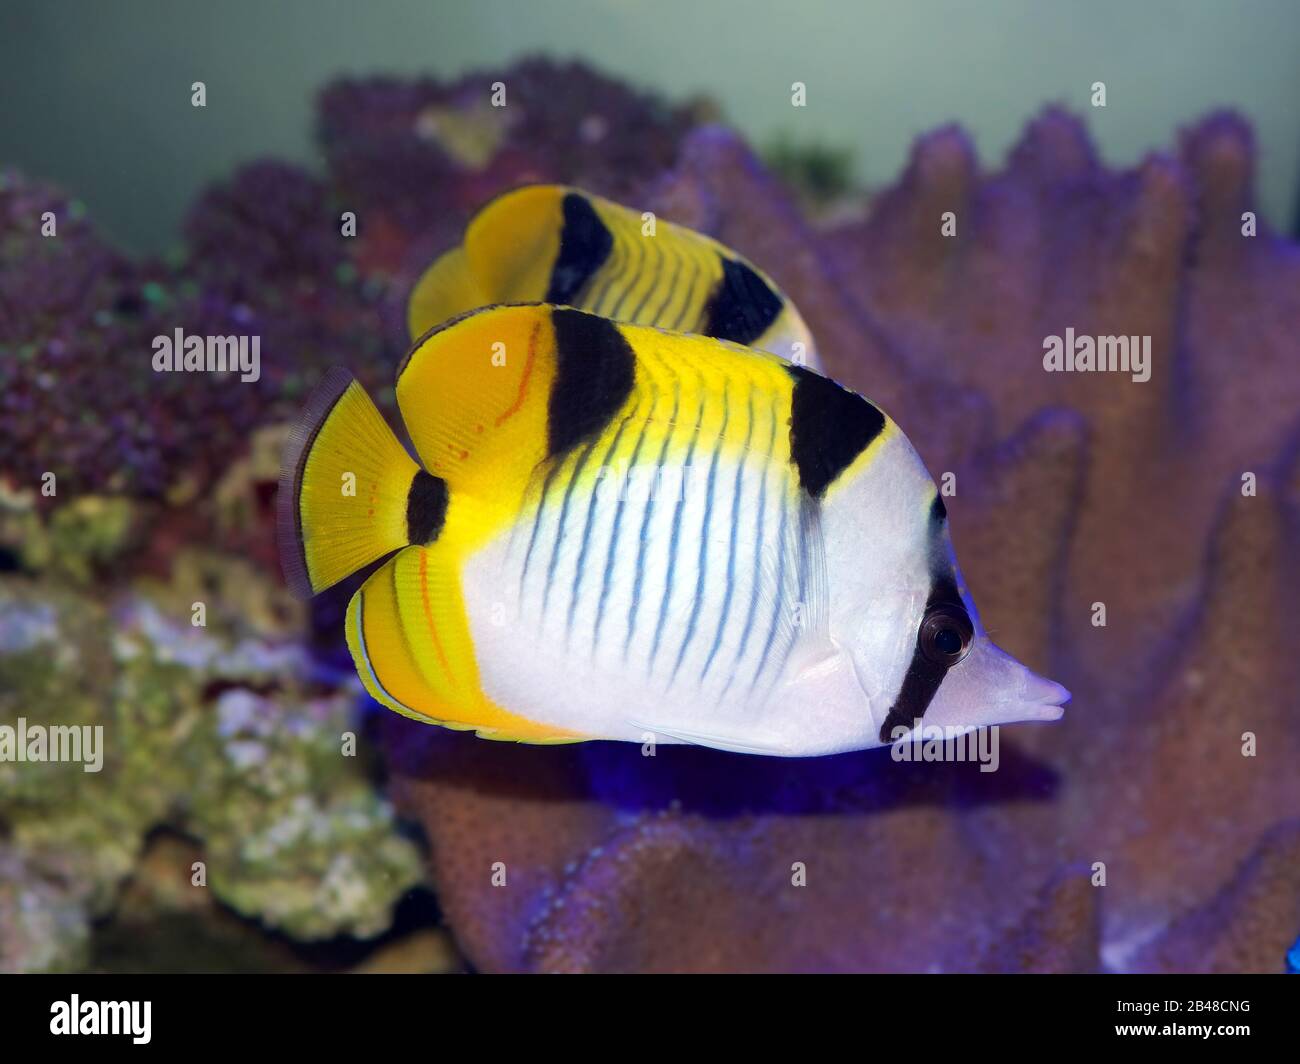 True Falcula Butterflyfish, Chaetodon falcula, also known as black-wedged, or saddle back butterflyfish, from the Indian Ocean Stock Photo